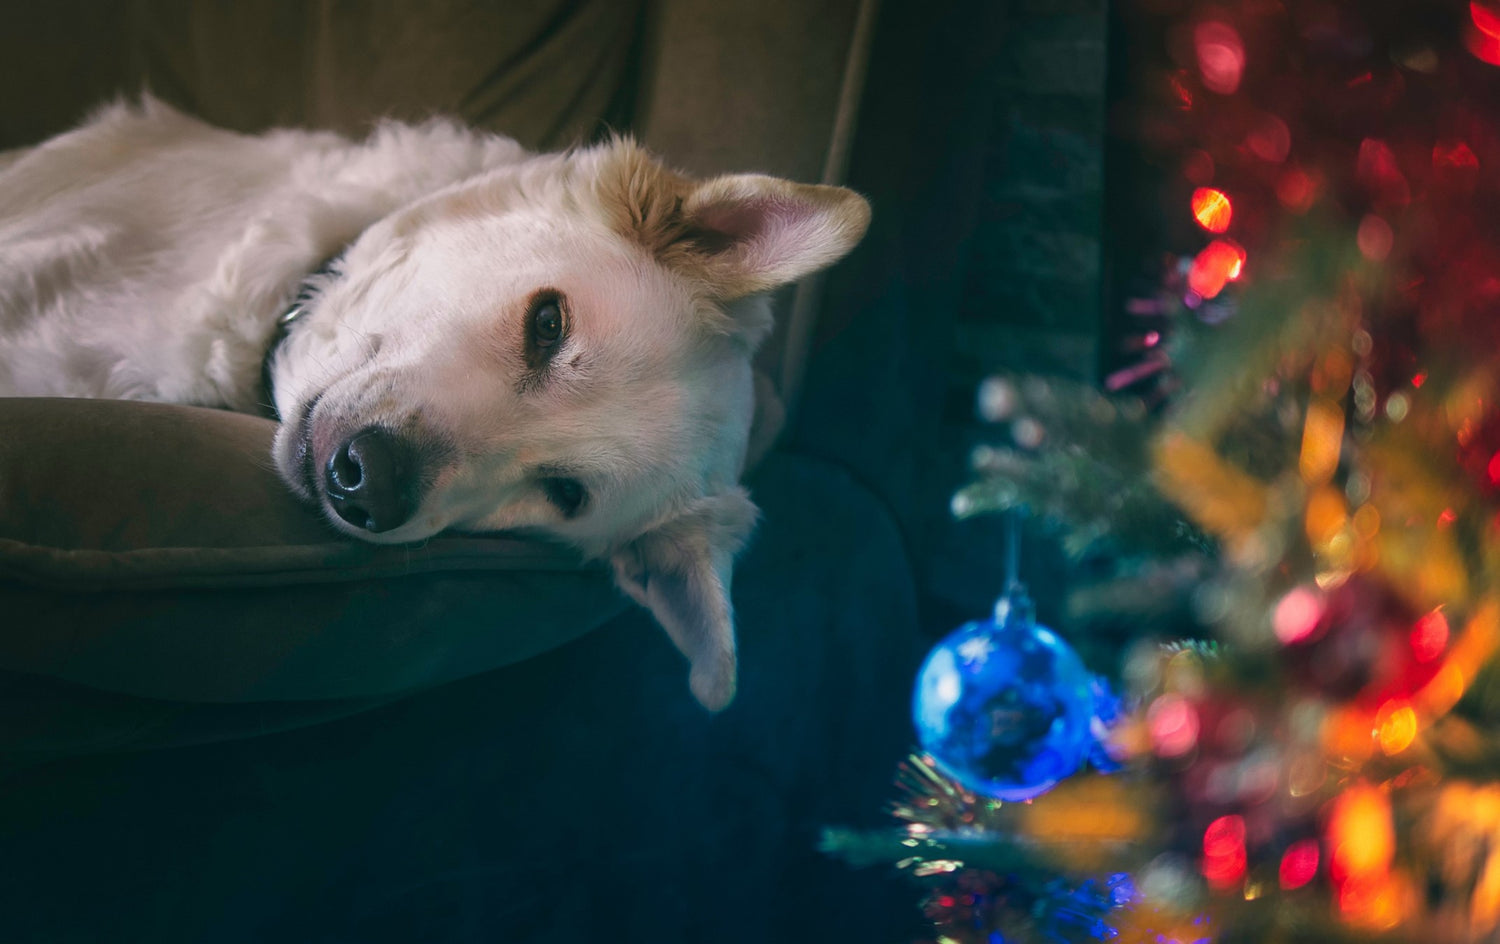 Dog laying on couch next to Christmas tree